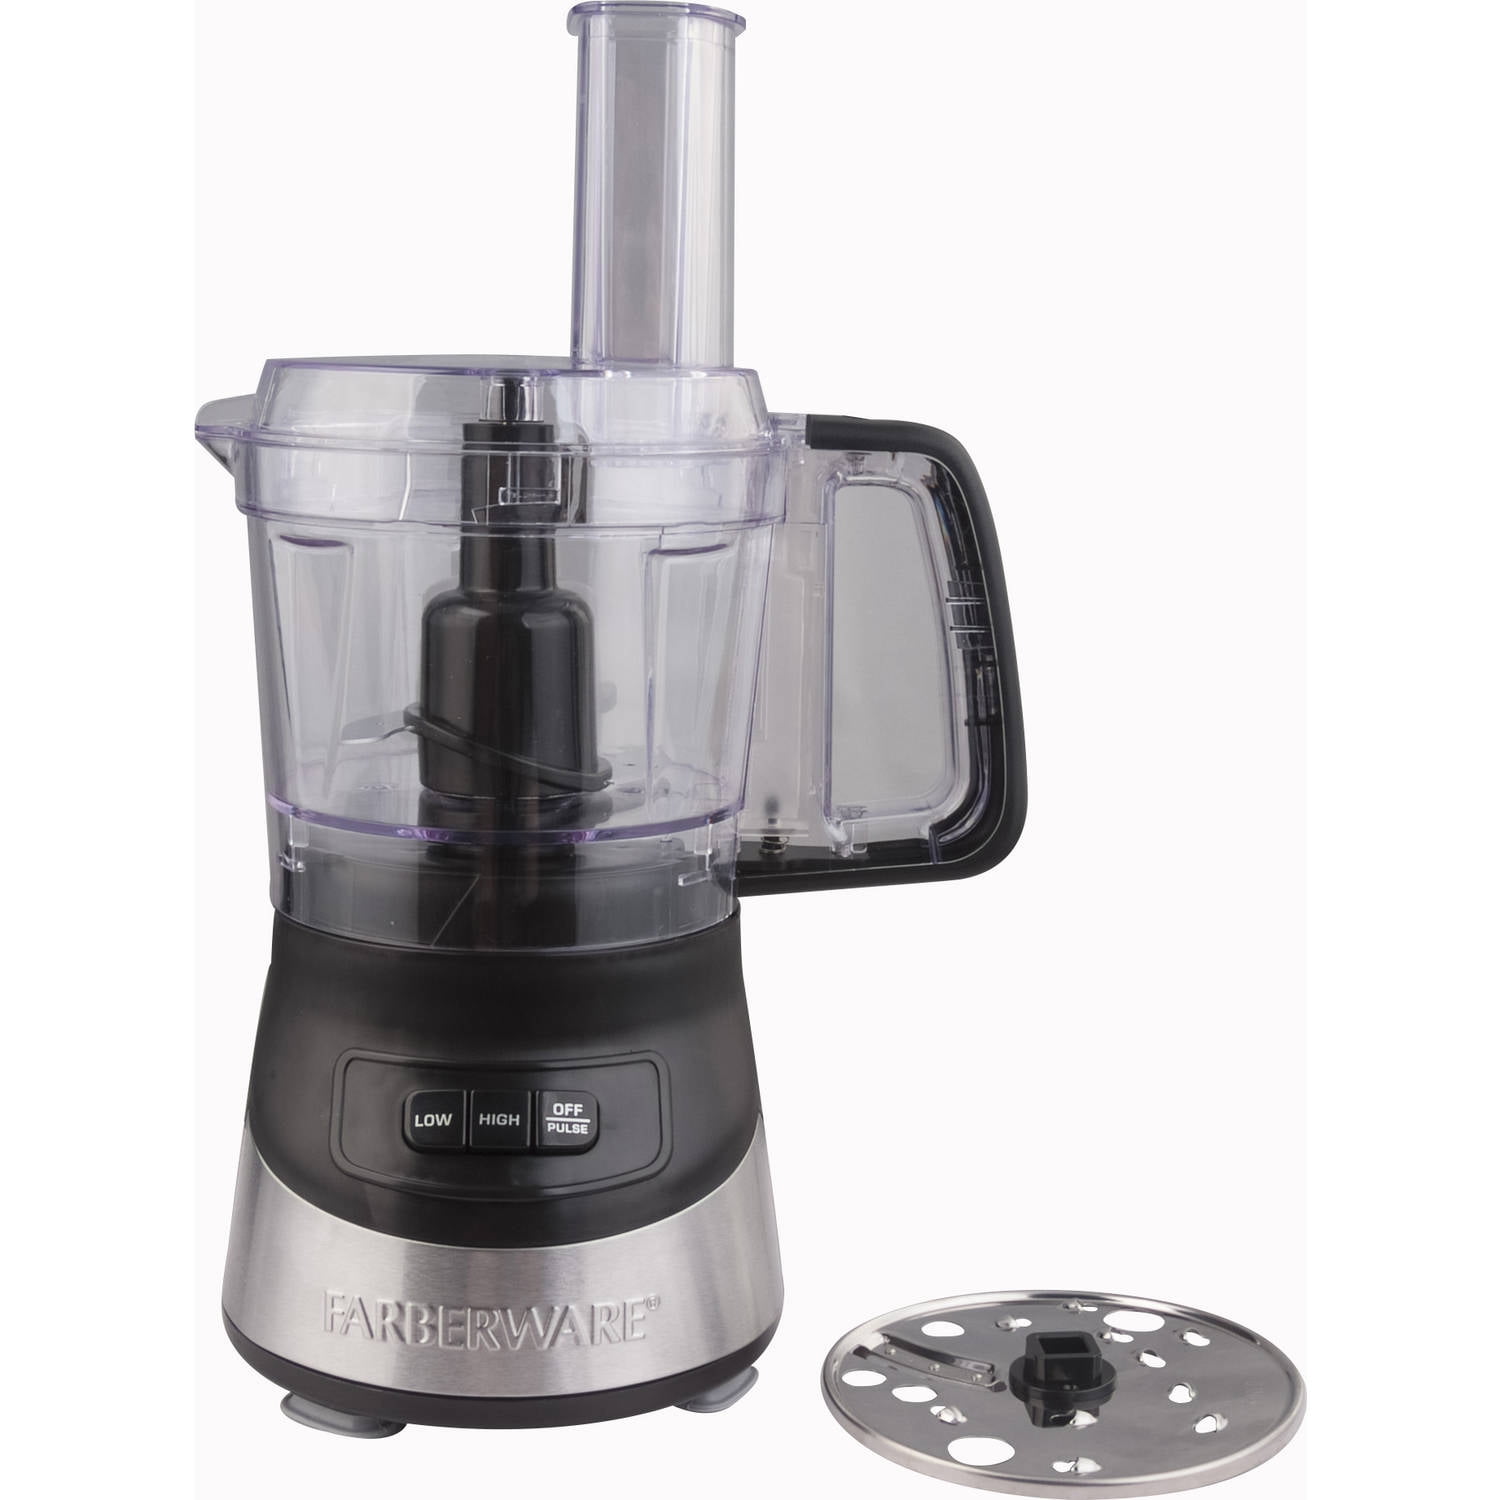 Starfrit 4-Cup 3-Speed White Food Processor with Oscillating Blades  024227-003-0000 - The Home Depot